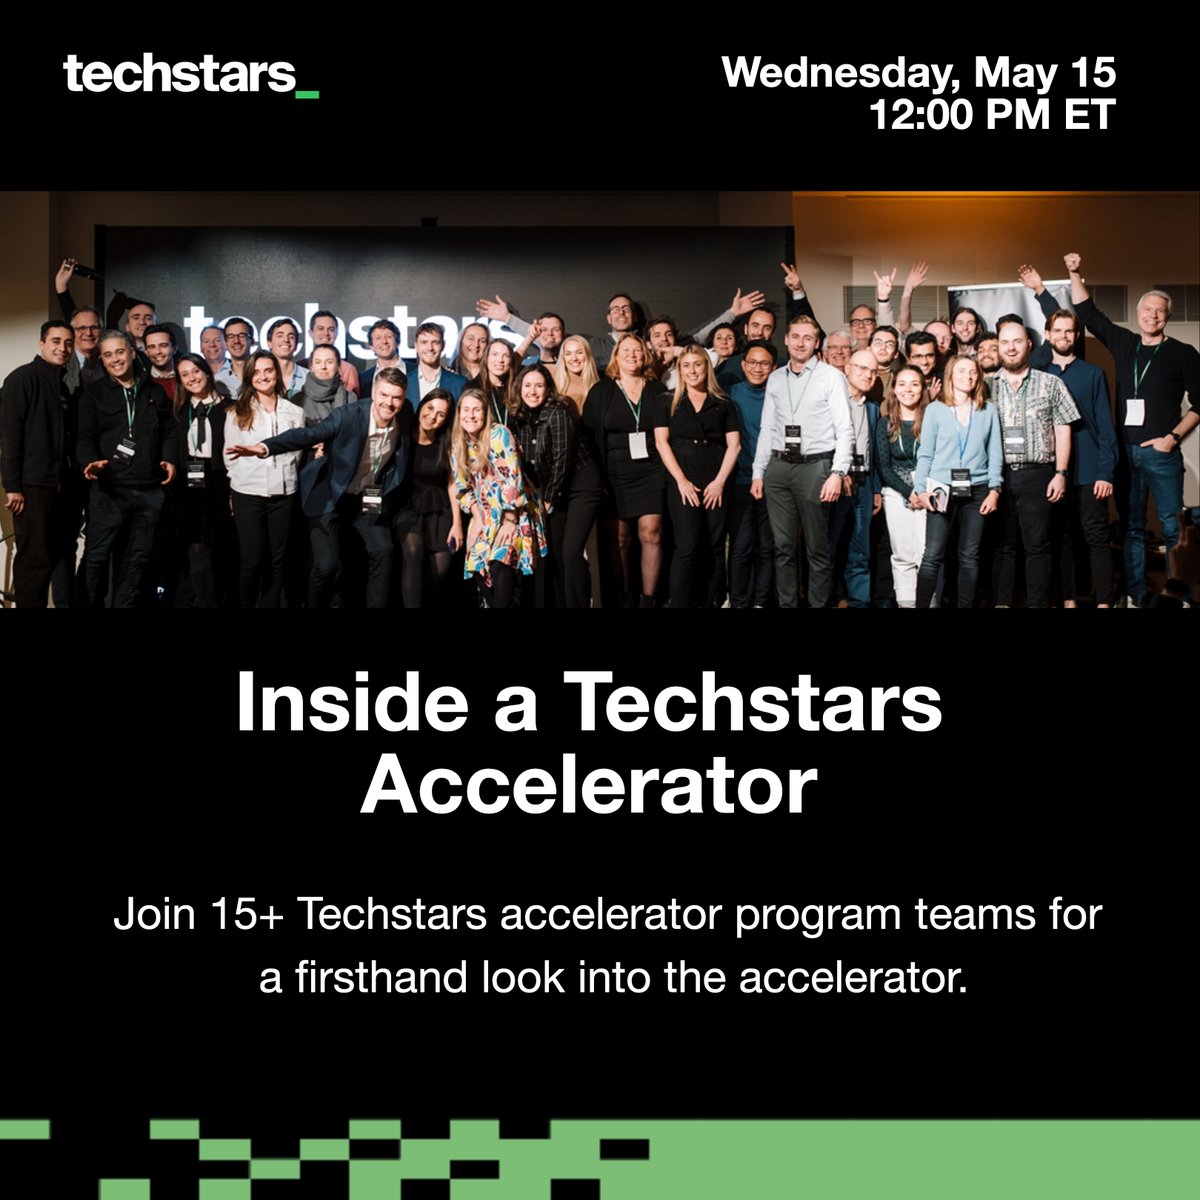 Curious about what Techstars can do for your startup❓ Join us to learn about our mentorship-driven programs, connect with our Managing Directors, and discover how to scale your startup. 📅 May 15th at 12:00pm ET 🔗 tsta.rs/Cz3550Rpyqs We can't wait to meet you!